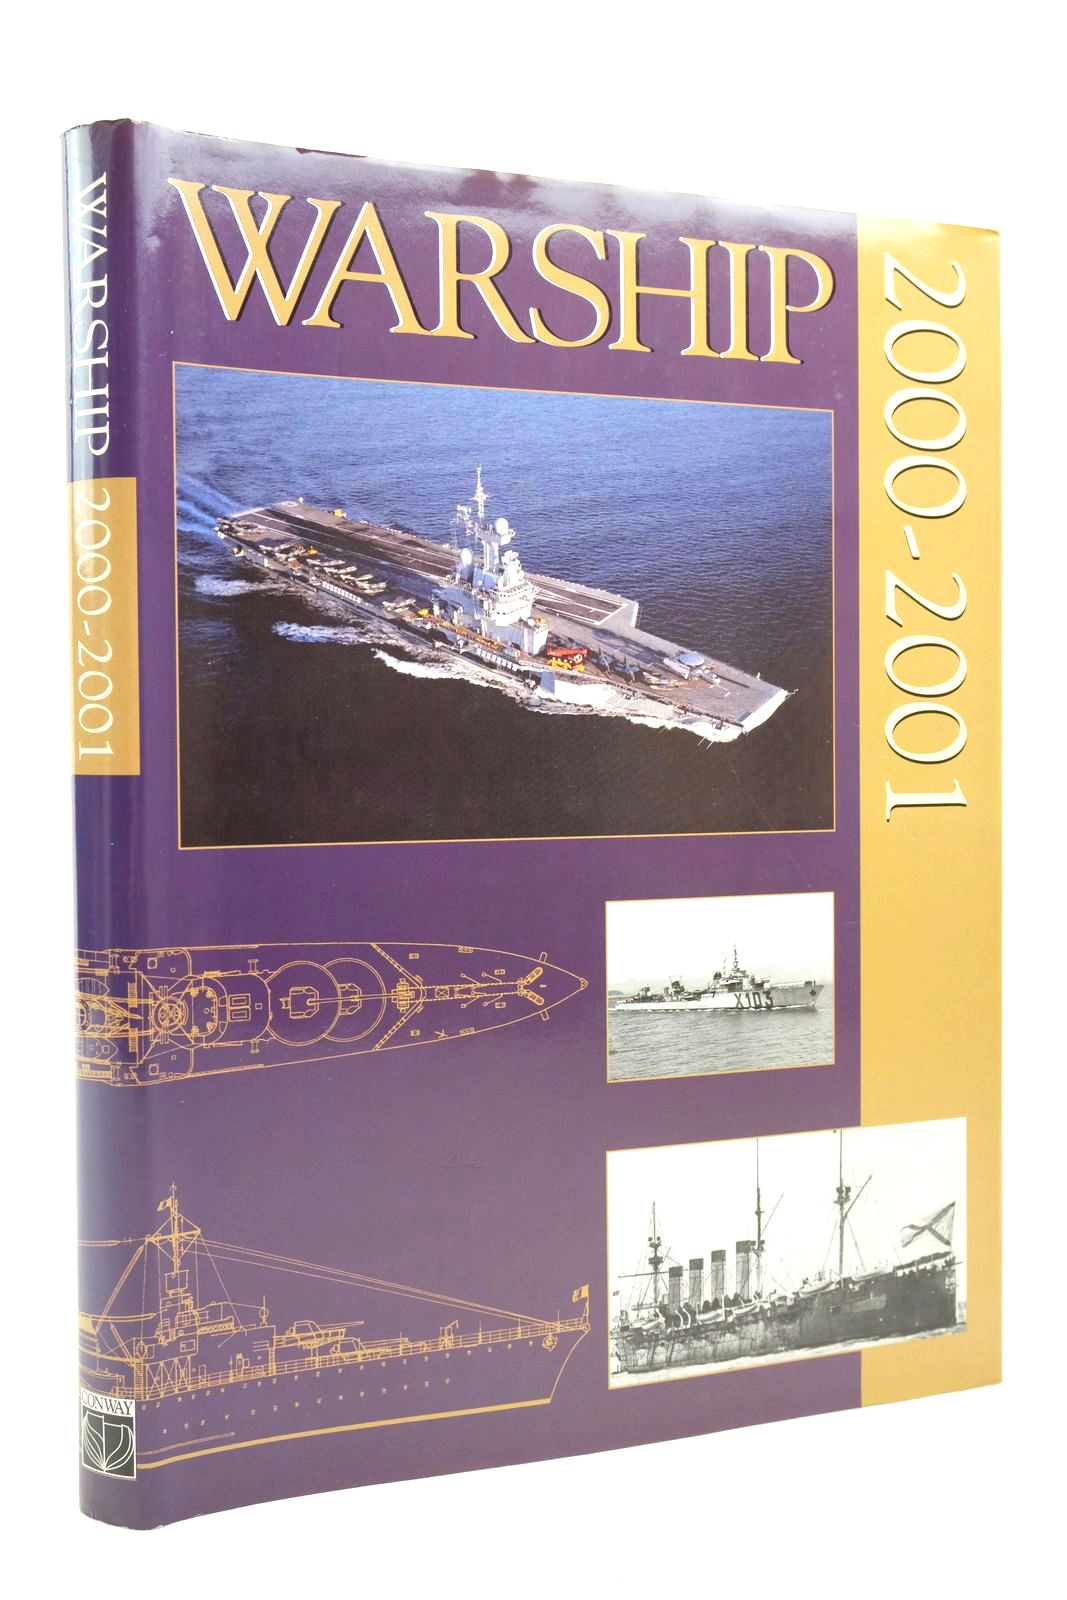 Photo of WARSHIP 2000-2001 written by Preston, Anthony et al, published by Conway Maritime Press (STOCK CODE: 2139851)  for sale by Stella & Rose's Books